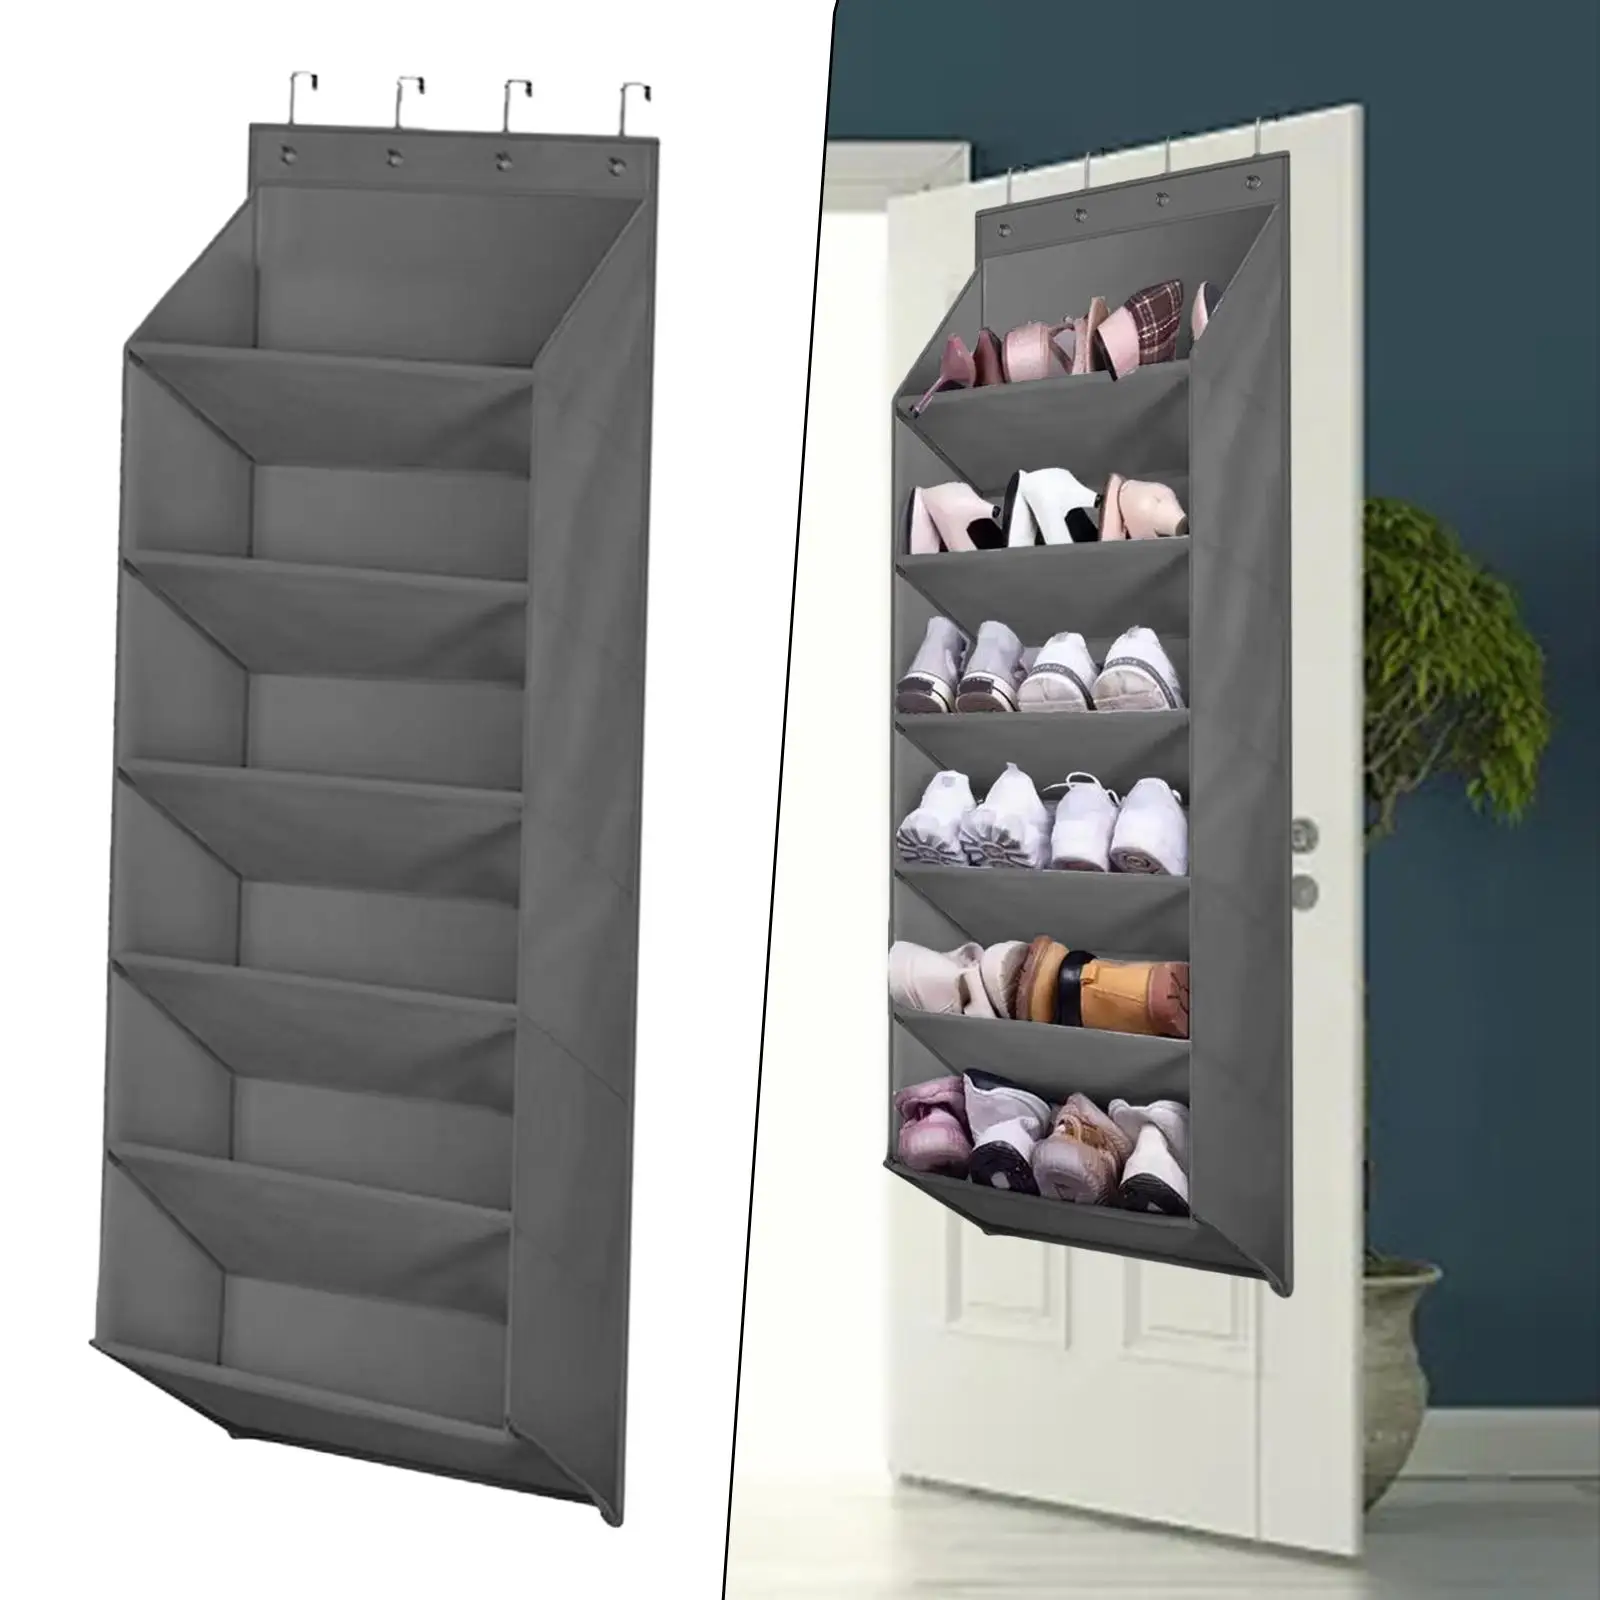 Deep Pockets Door Shoe Rack suits Kids Adults Oxford Cloth Hanging Storage Bag for Clothing Towels Baby Items 16 Pair Shoes